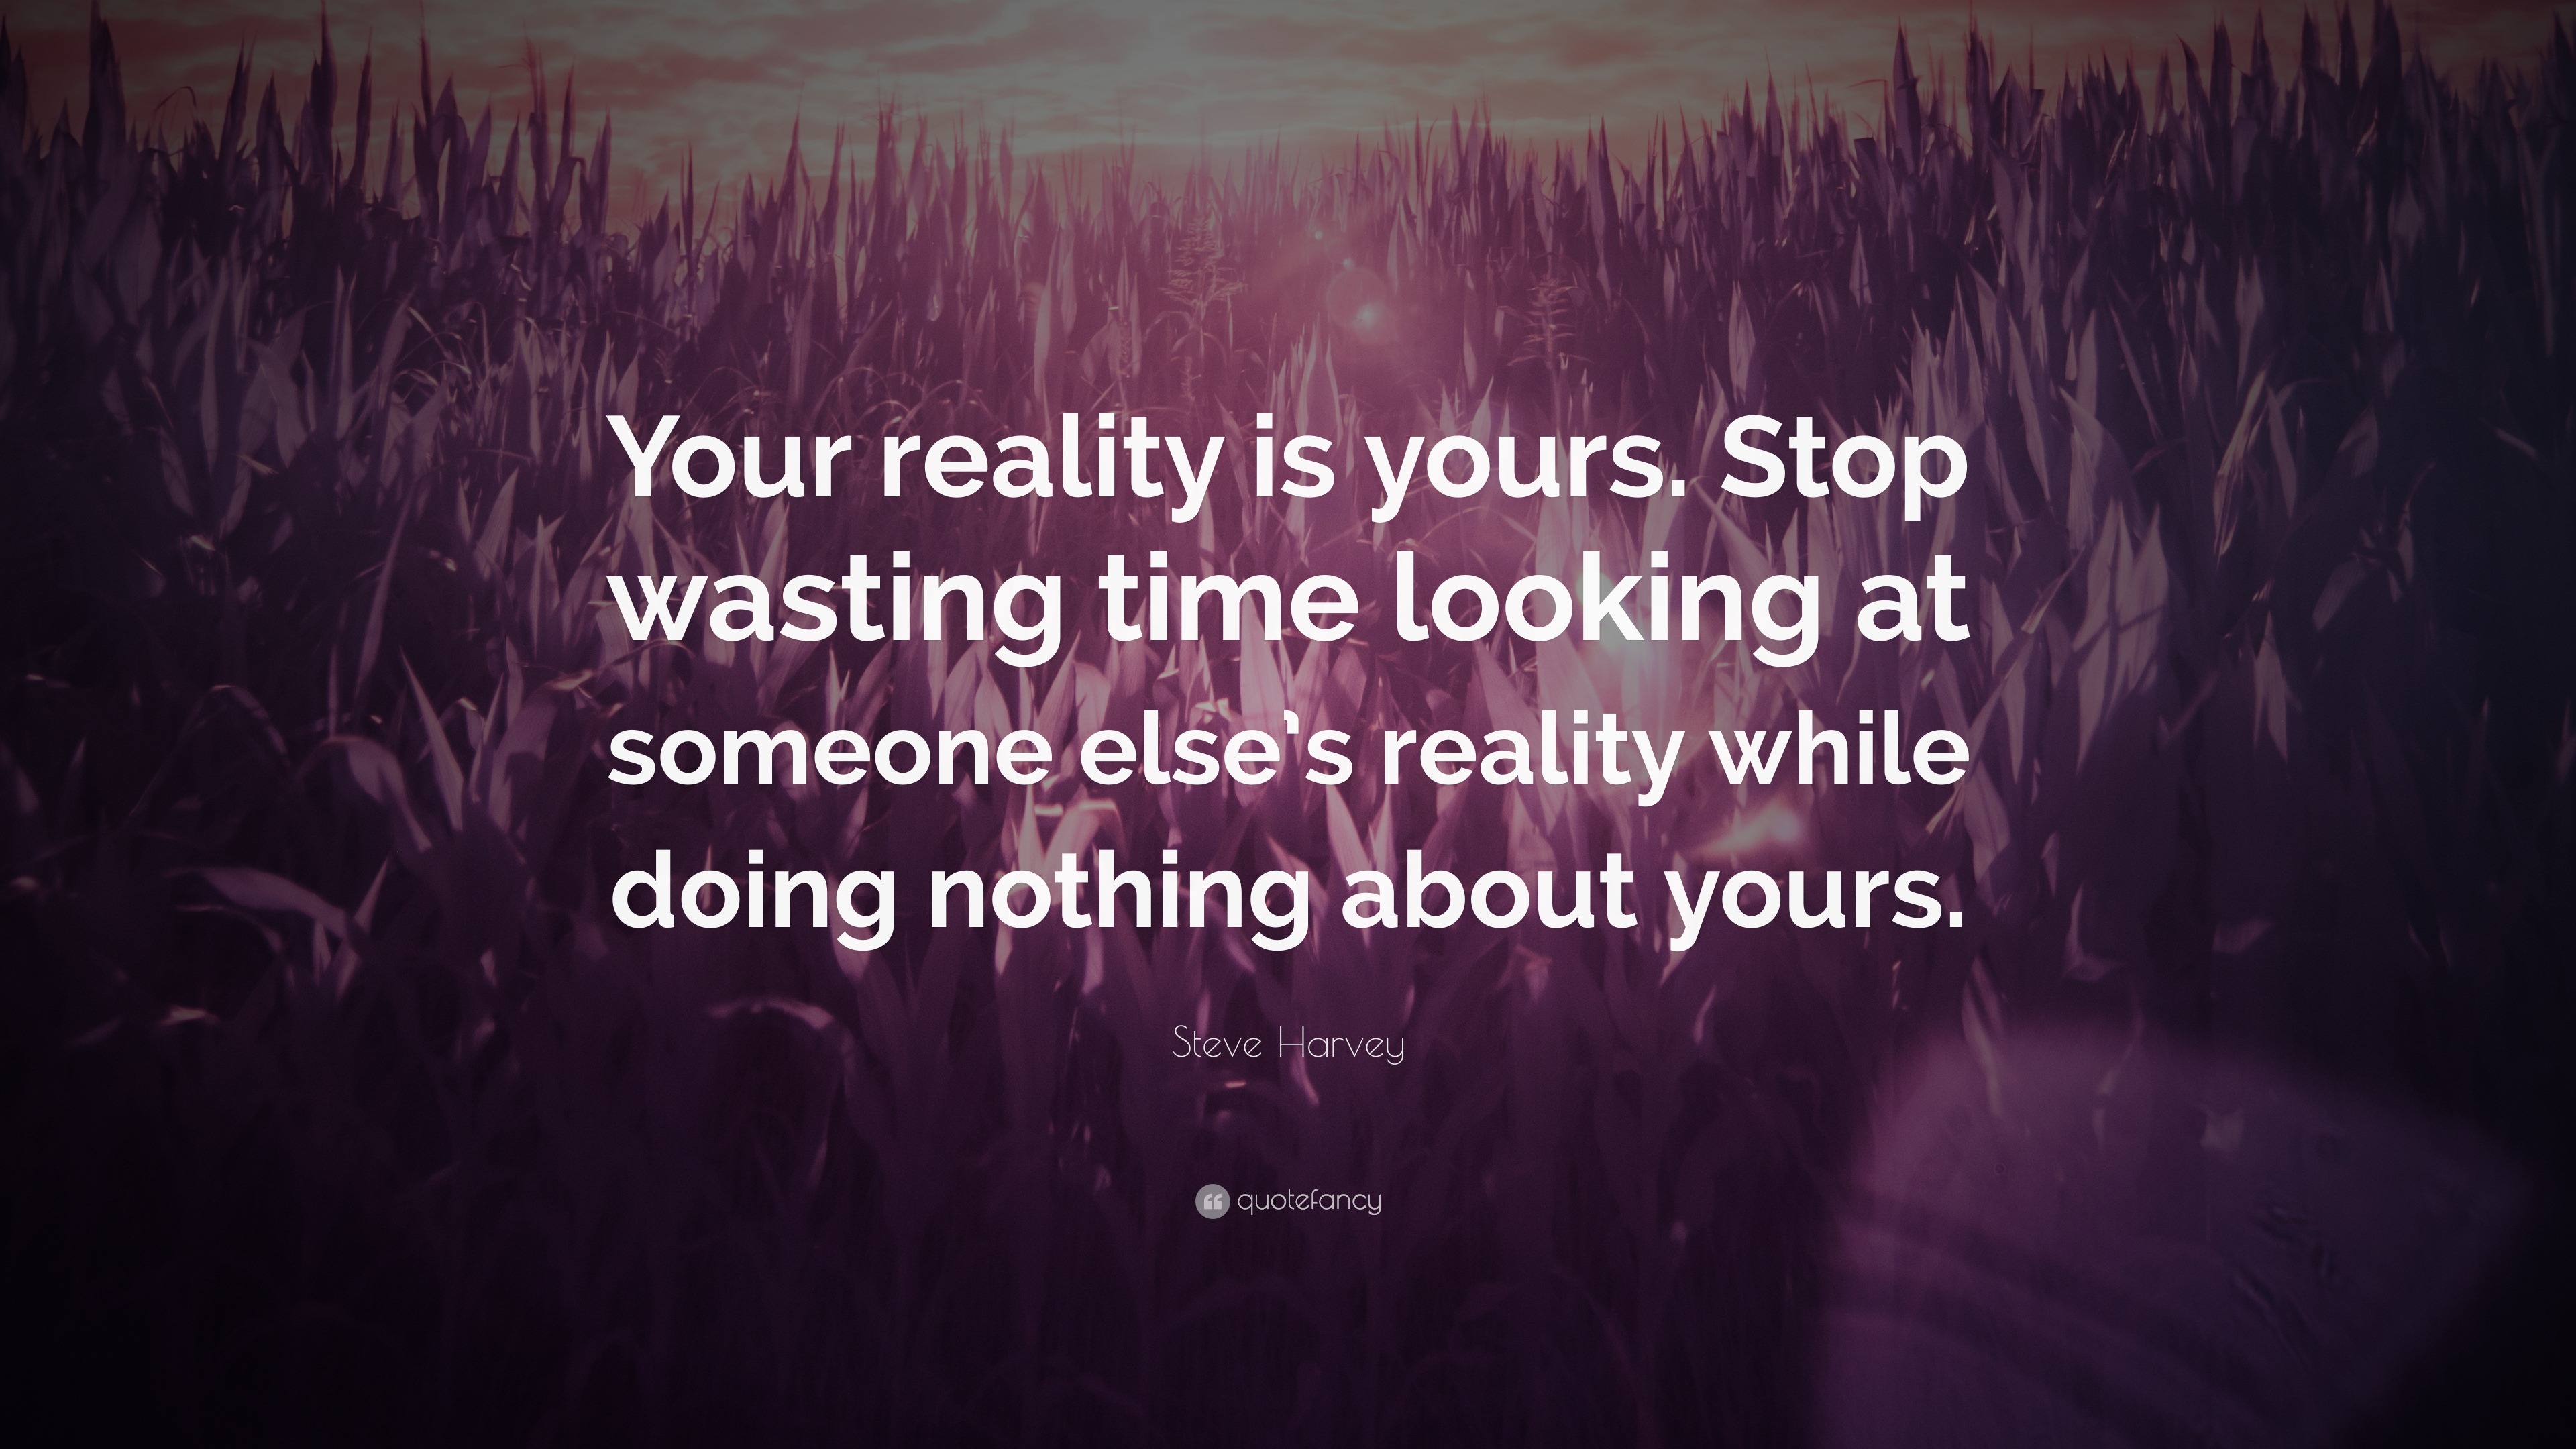 Steve Harvey Quote “Your reality is yours Stop wasting time looking at someone